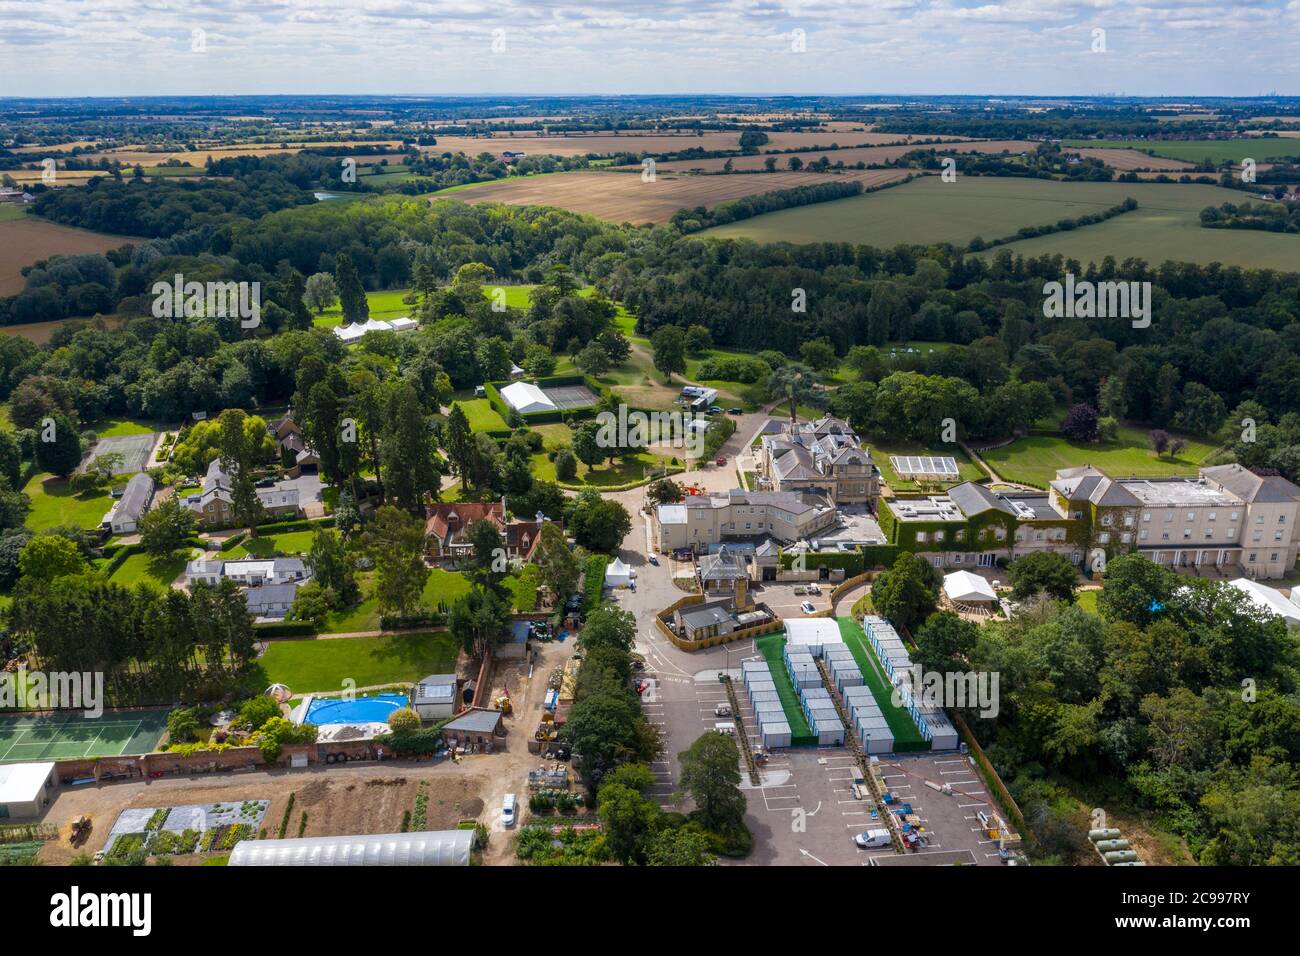 Essex, UK. 29th July 2020. The iconic white tent from British TV series 'The Great British Bake Off' in the grounds of its new filming location at the Down Hall Hotel in Bishop's Stortford, Essex. Credit: Ricci Fothergill/Alamy Live News Stock Photo